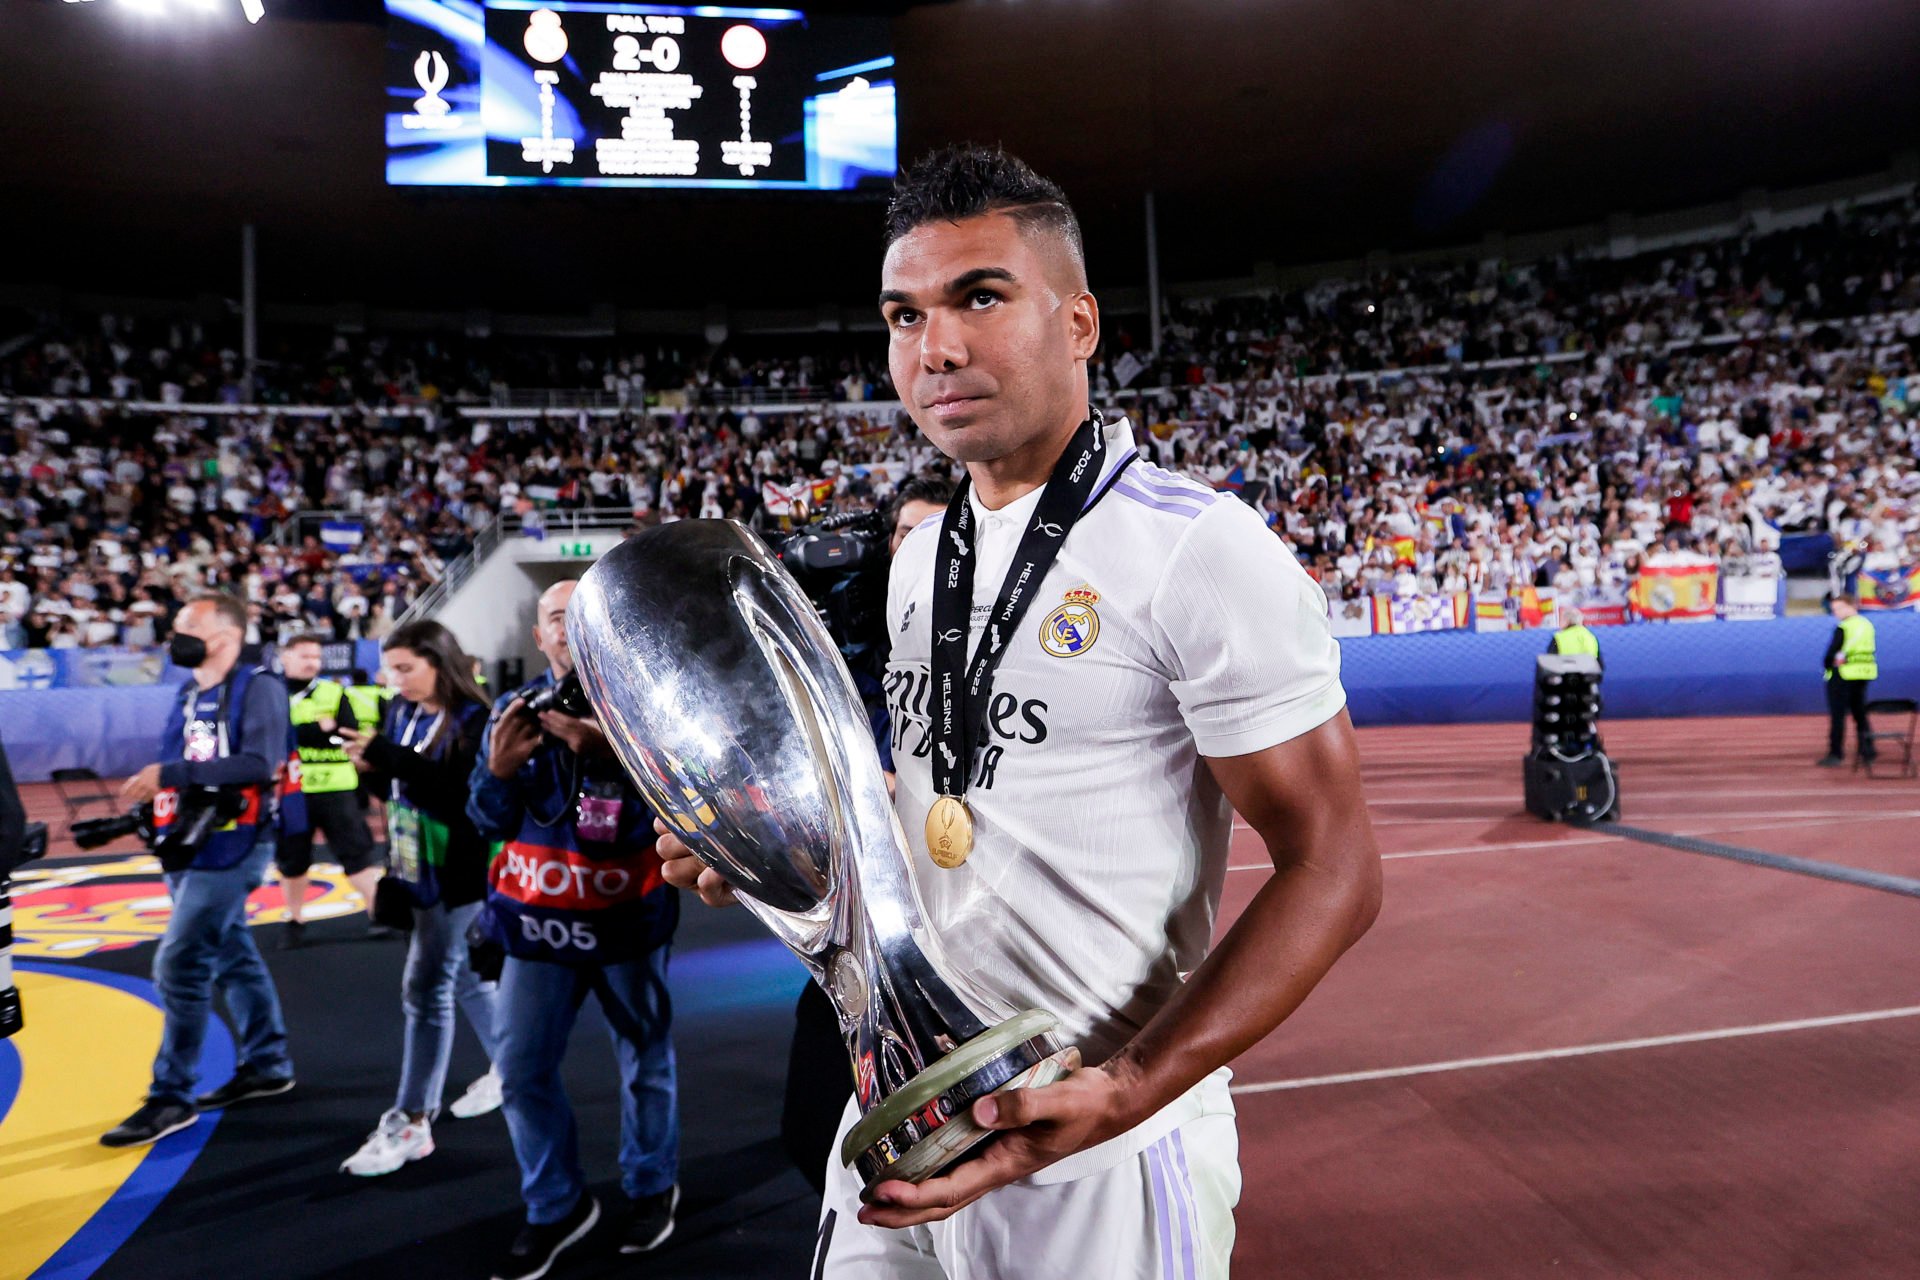 Manchester United want to sign Casemiro from Real Madrid